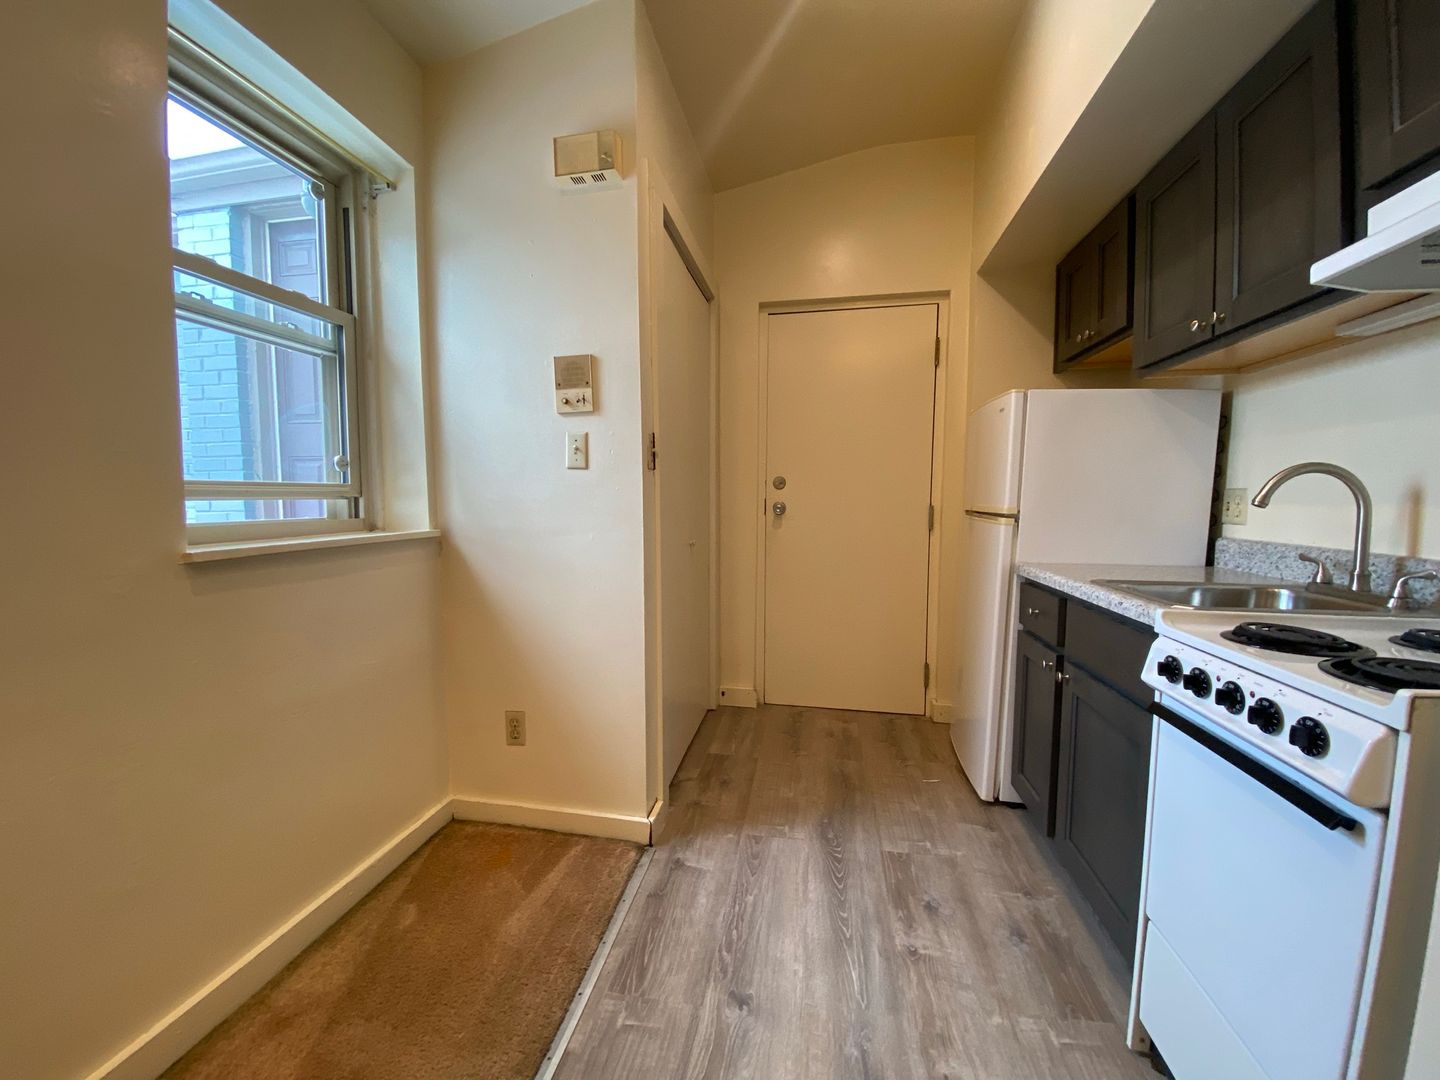 Affordable Studio on Meyran Avenue! Great Oakland Location! Call Today!